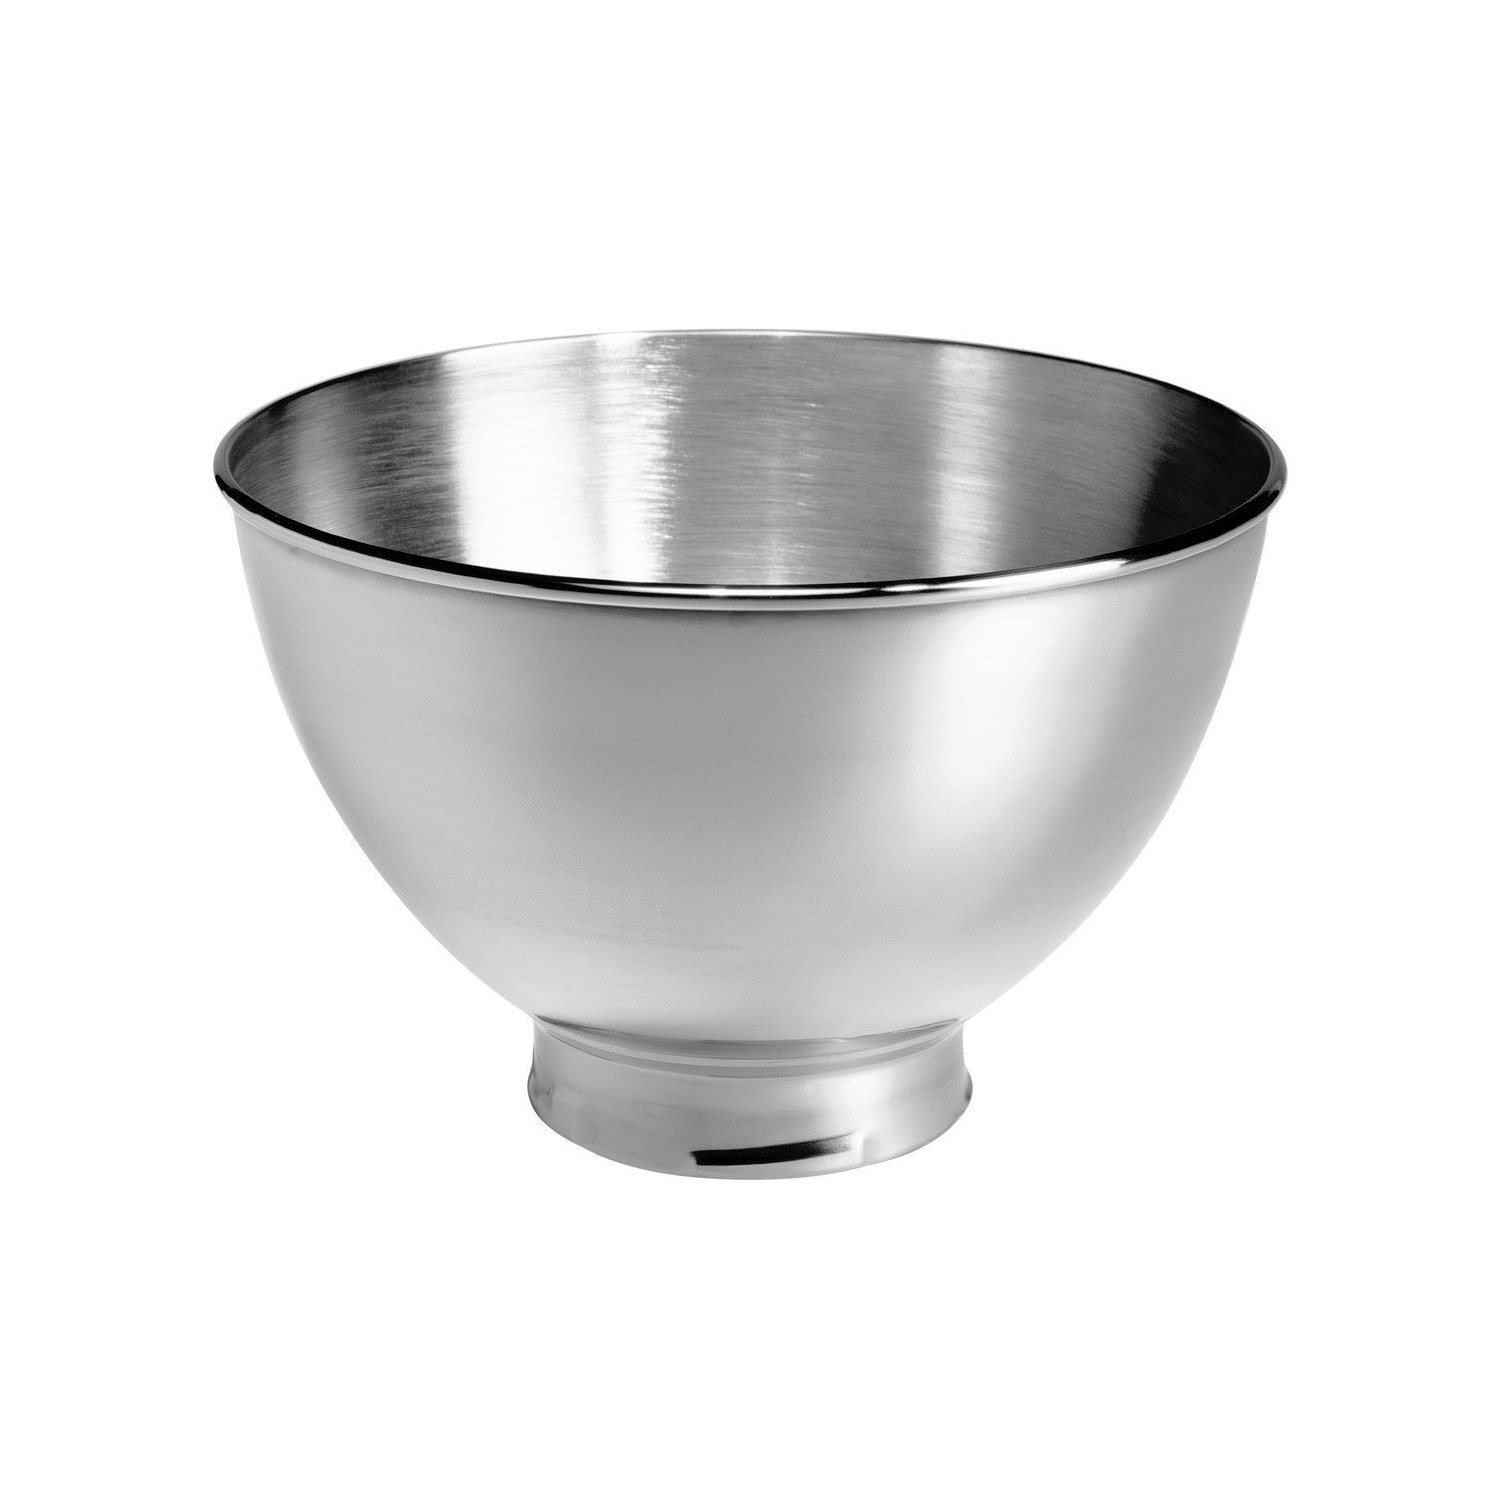 Pastry paddle, suitable for 4.3 L and 4.8 L bowls, stainless steel -  KitchenAid brand